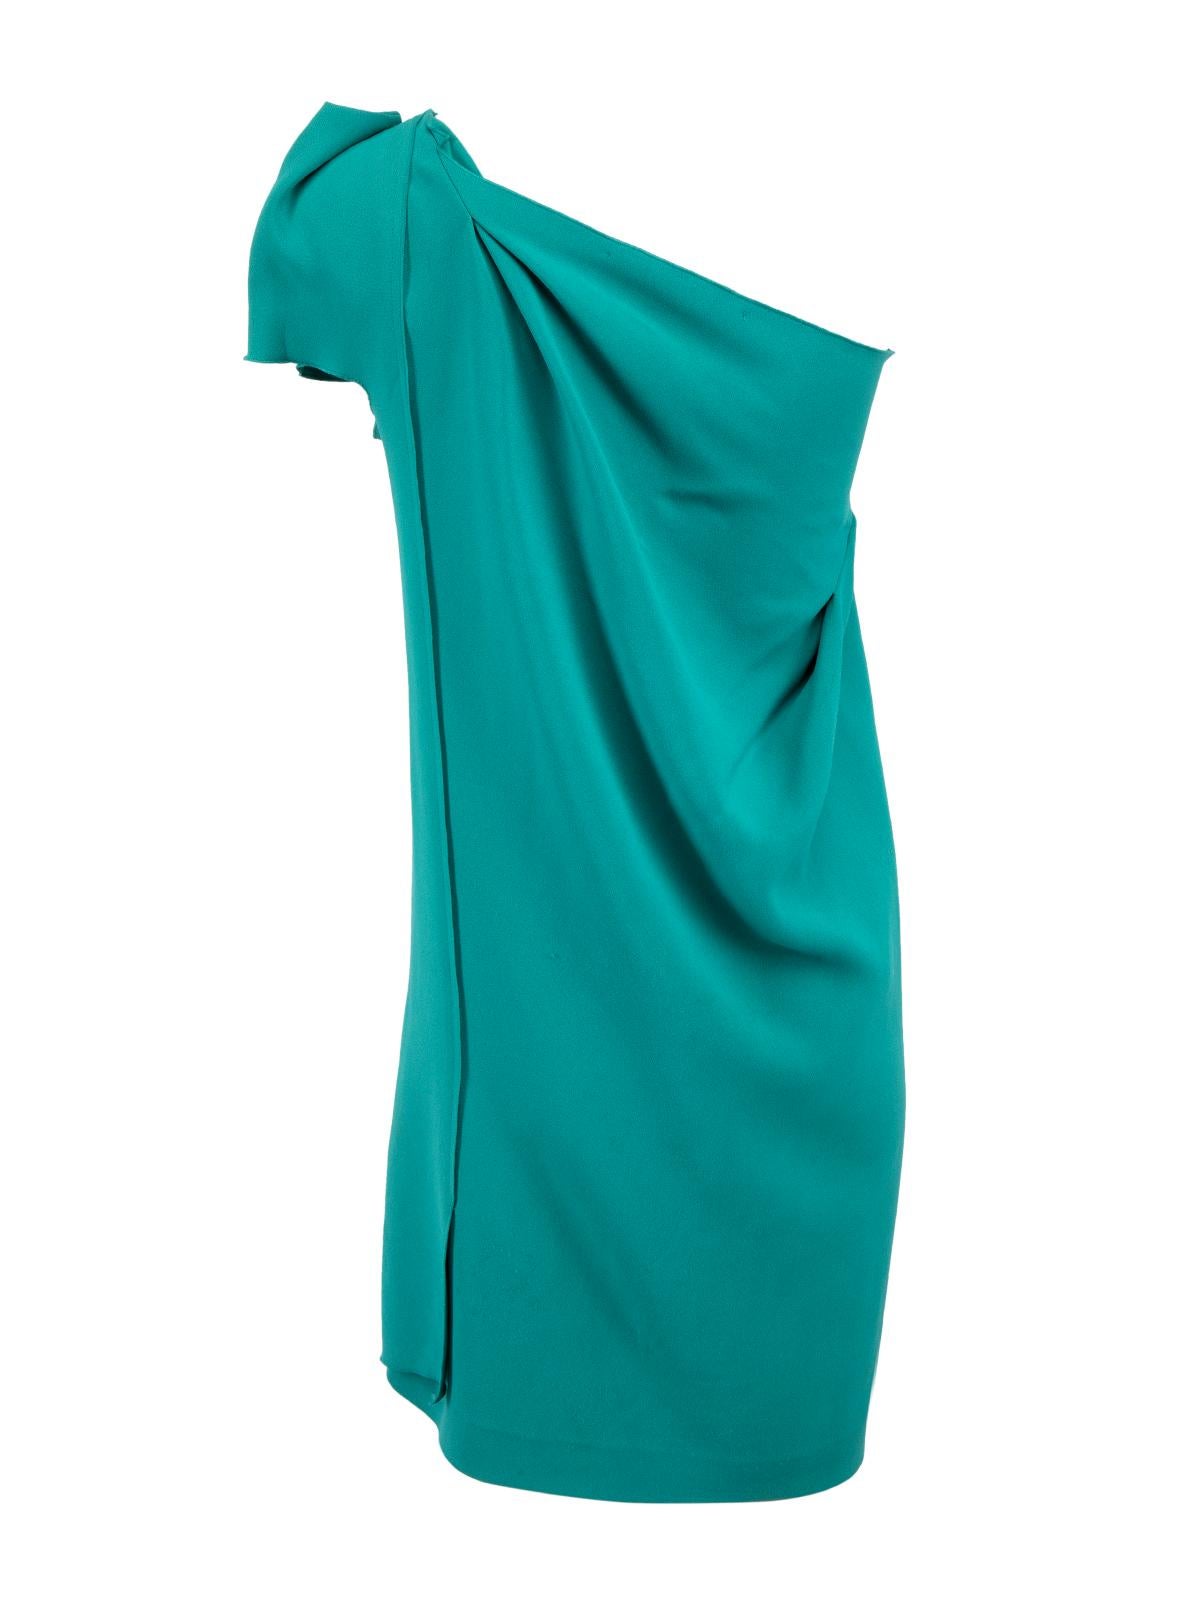 Roland Mouret Women's Asymmetric One Shoulder Mini Dress In Excellent Condition For Sale In London, GB